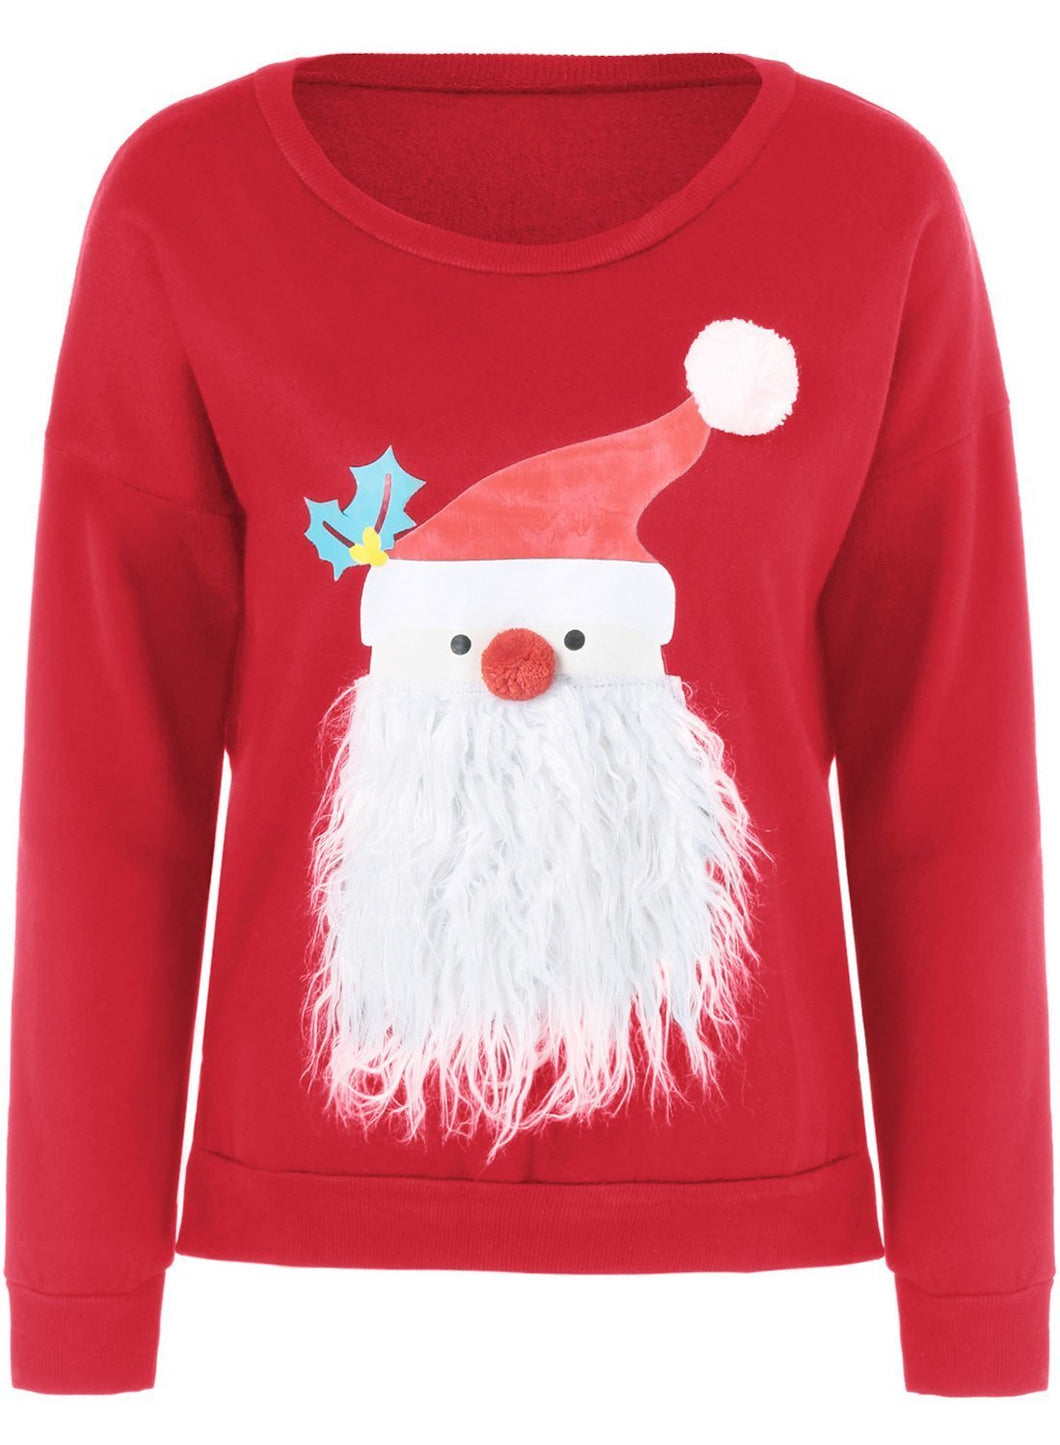 Fashion Round Neck Father Christmas Patterned Thicken Sweatshirt